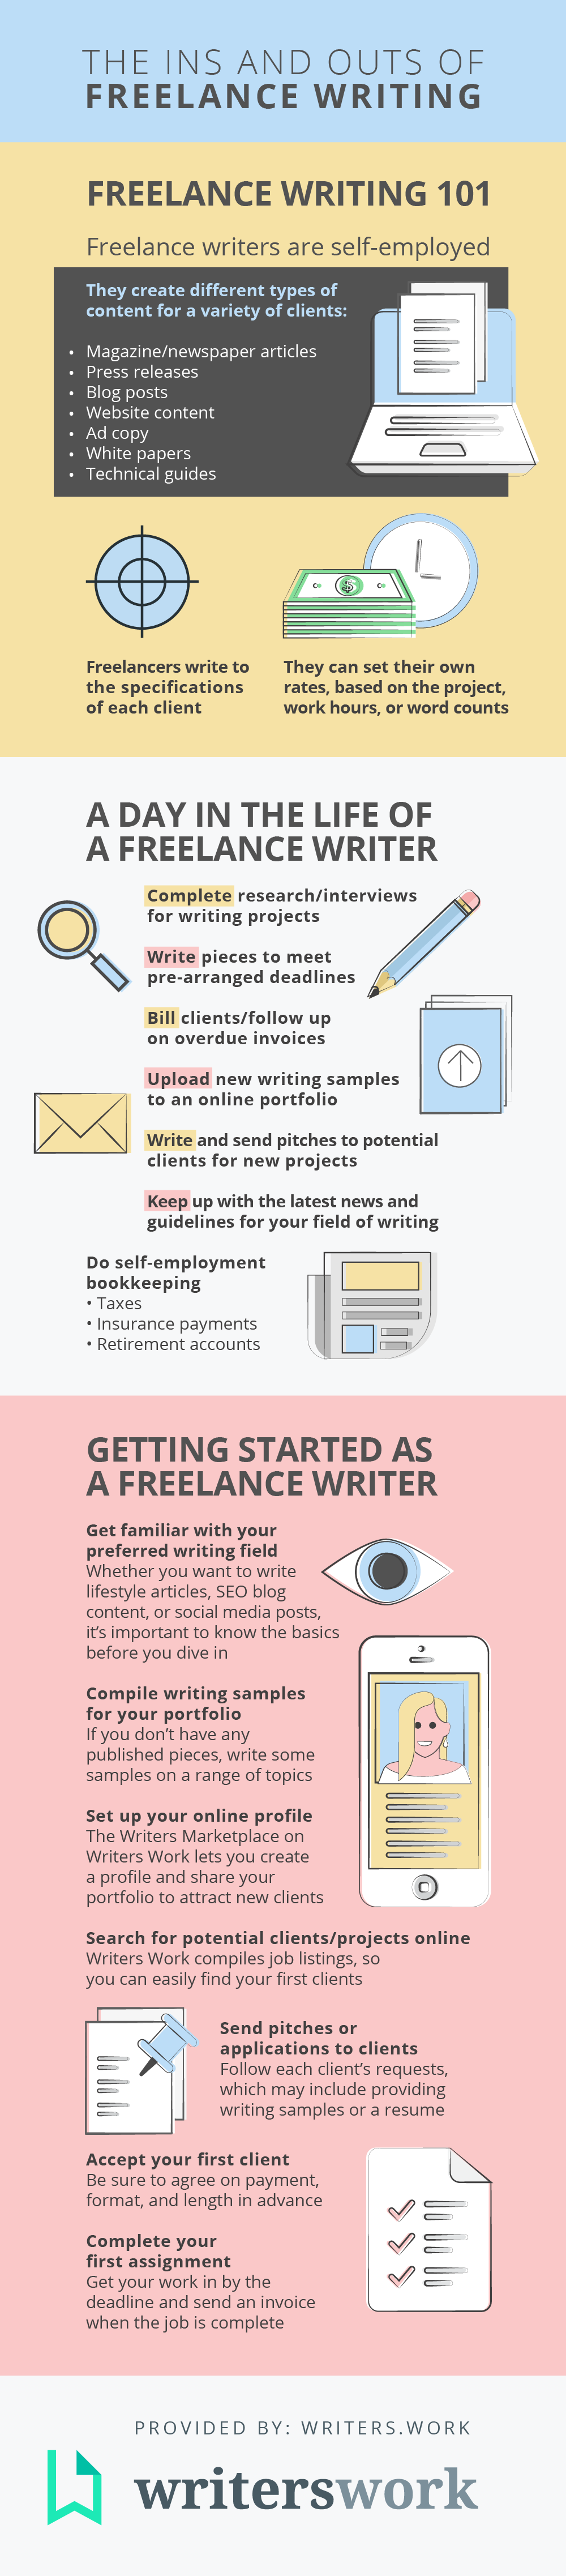 Infographic about the basics of freelance writing.